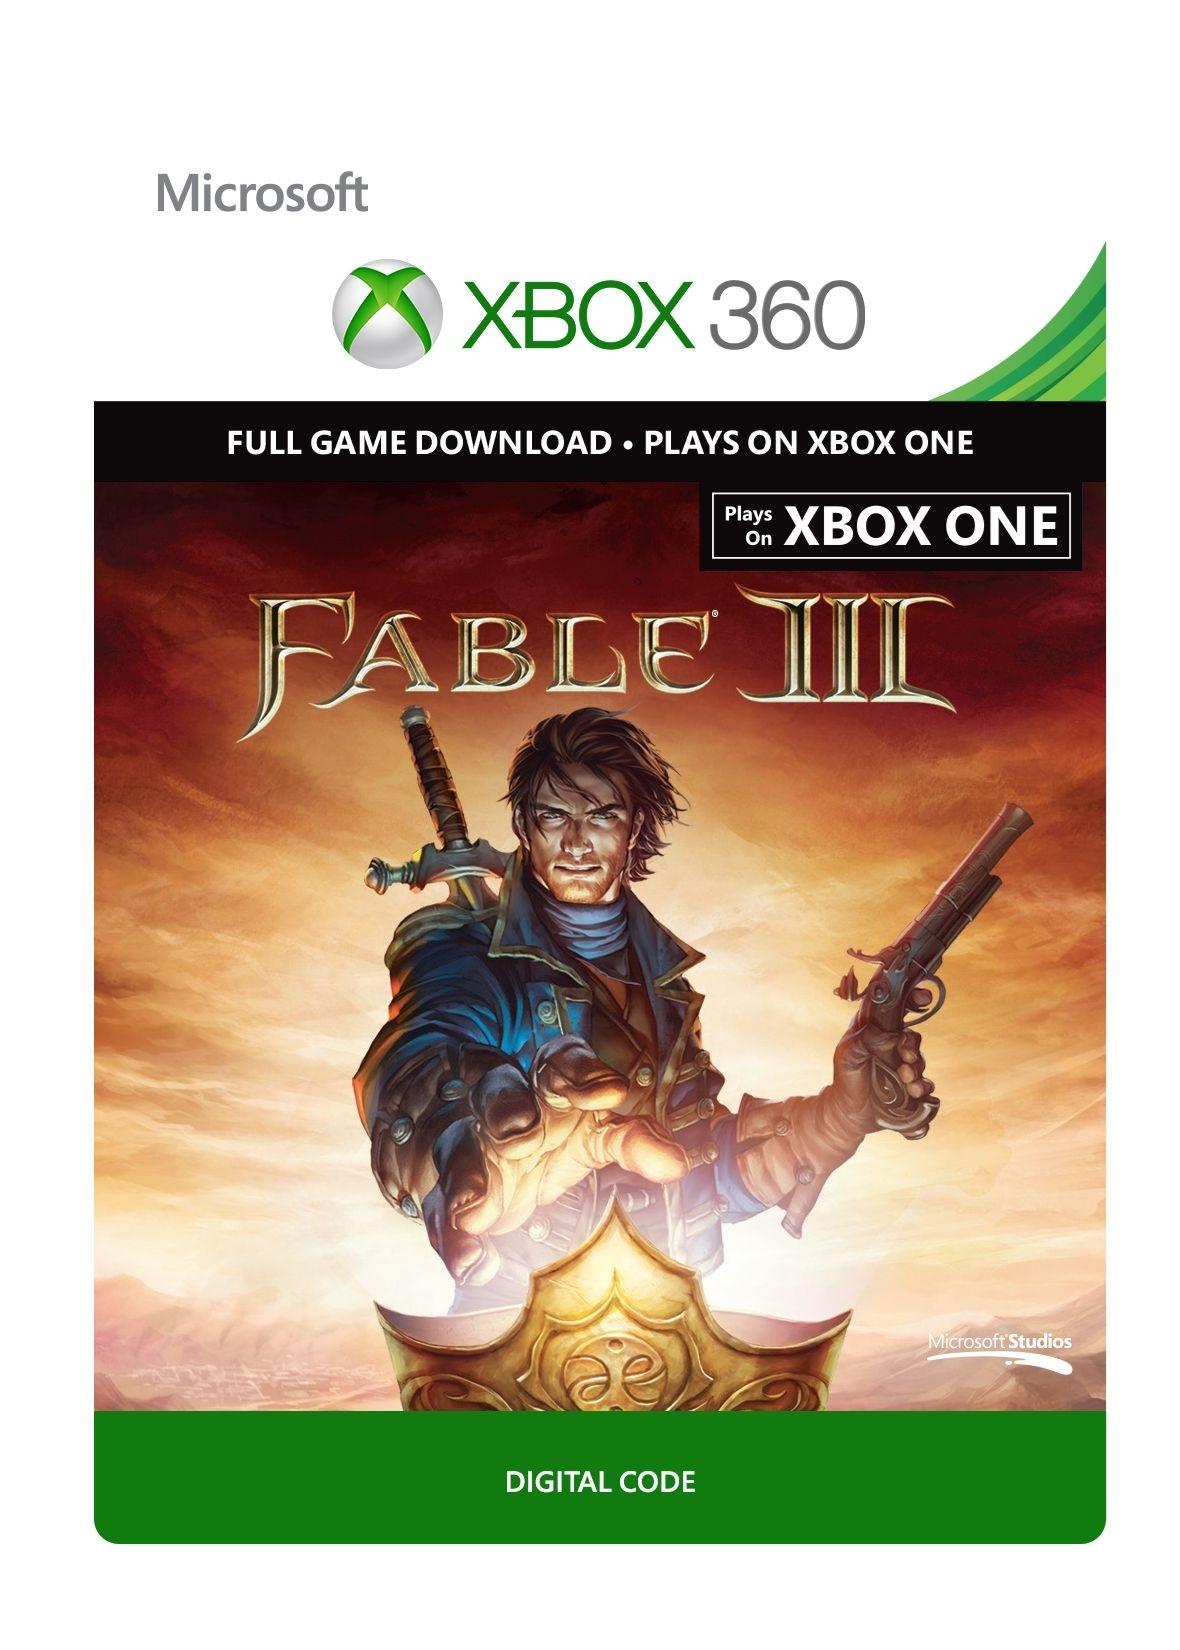 Fable III - Xbox 360 - Plays on Xbox One - Game | G9N-00003 (12353725-4102-4d21-b71c-37a3a5a8b431)